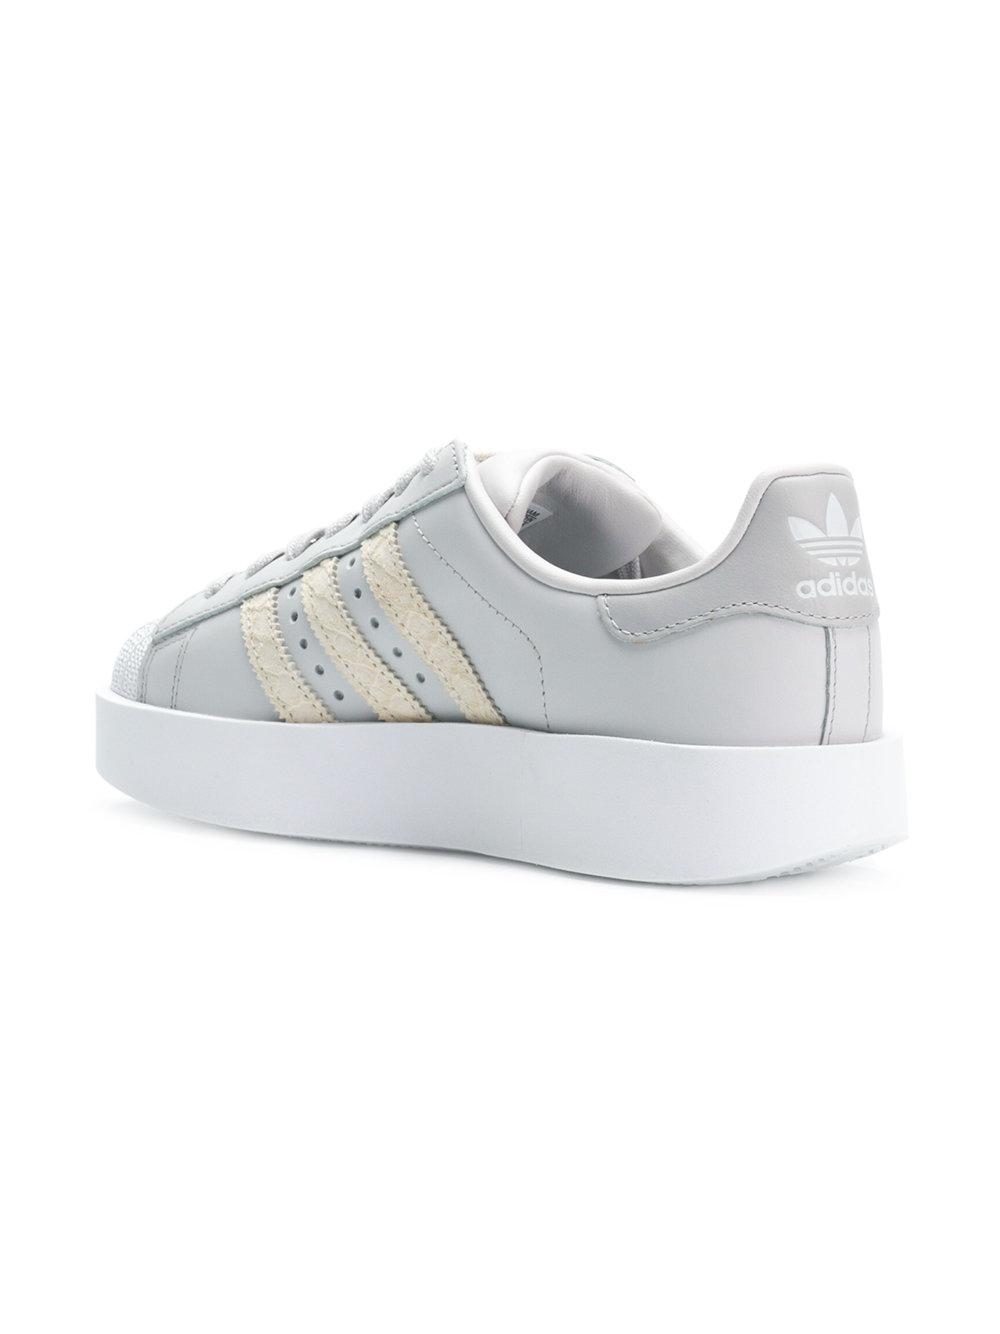 adidas Leather Superstar Bold Platform Sneakers in White | Lyst